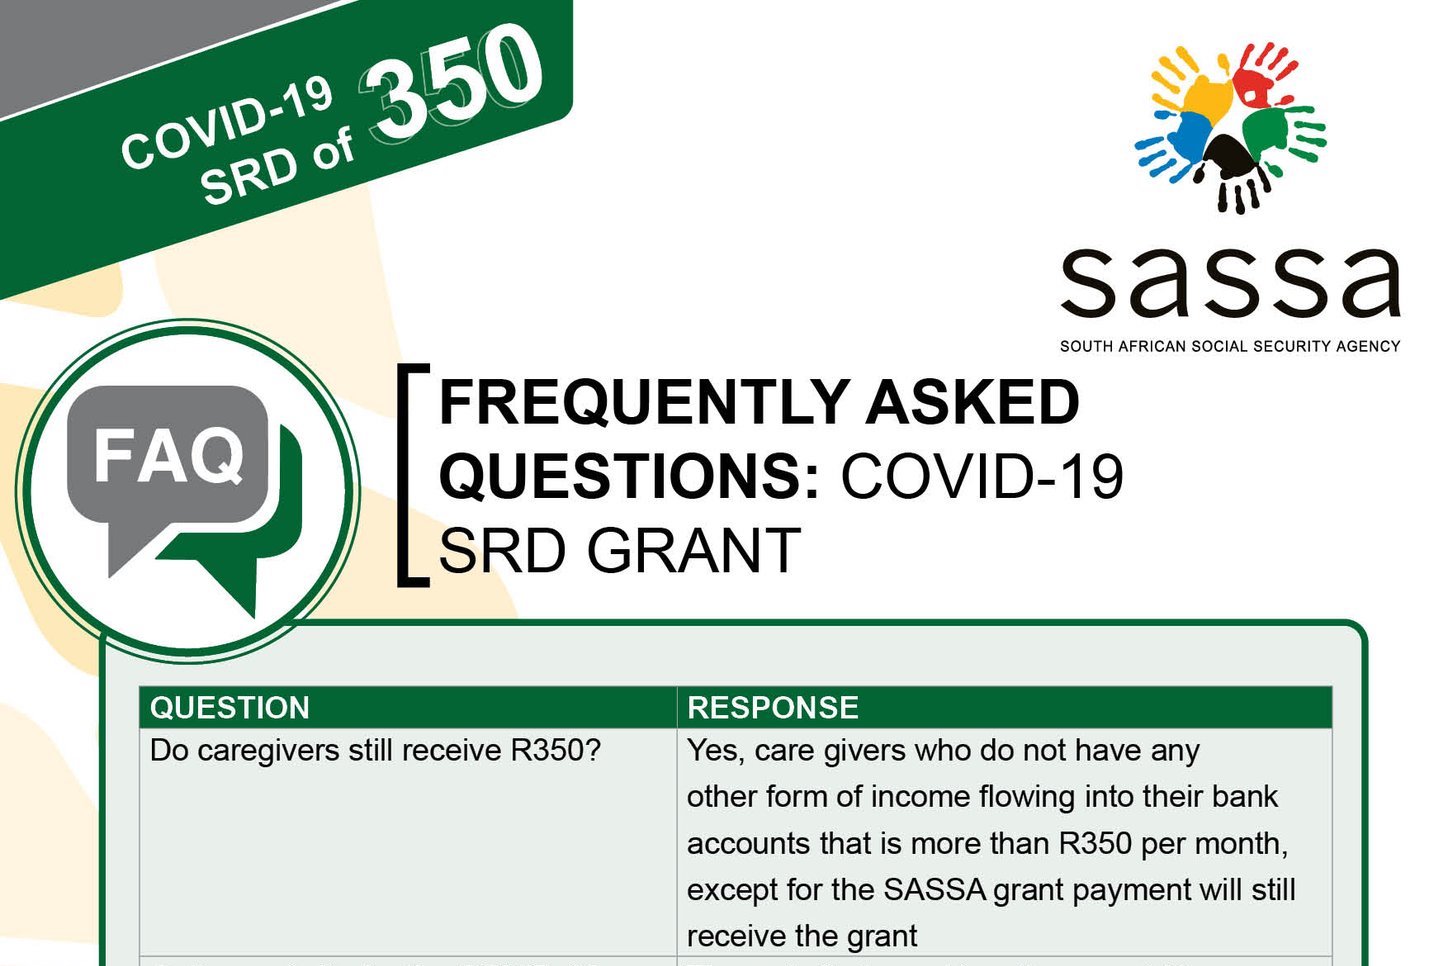 Sassa Gives Answers to Some of SRD Grant Frequently Asked Questions